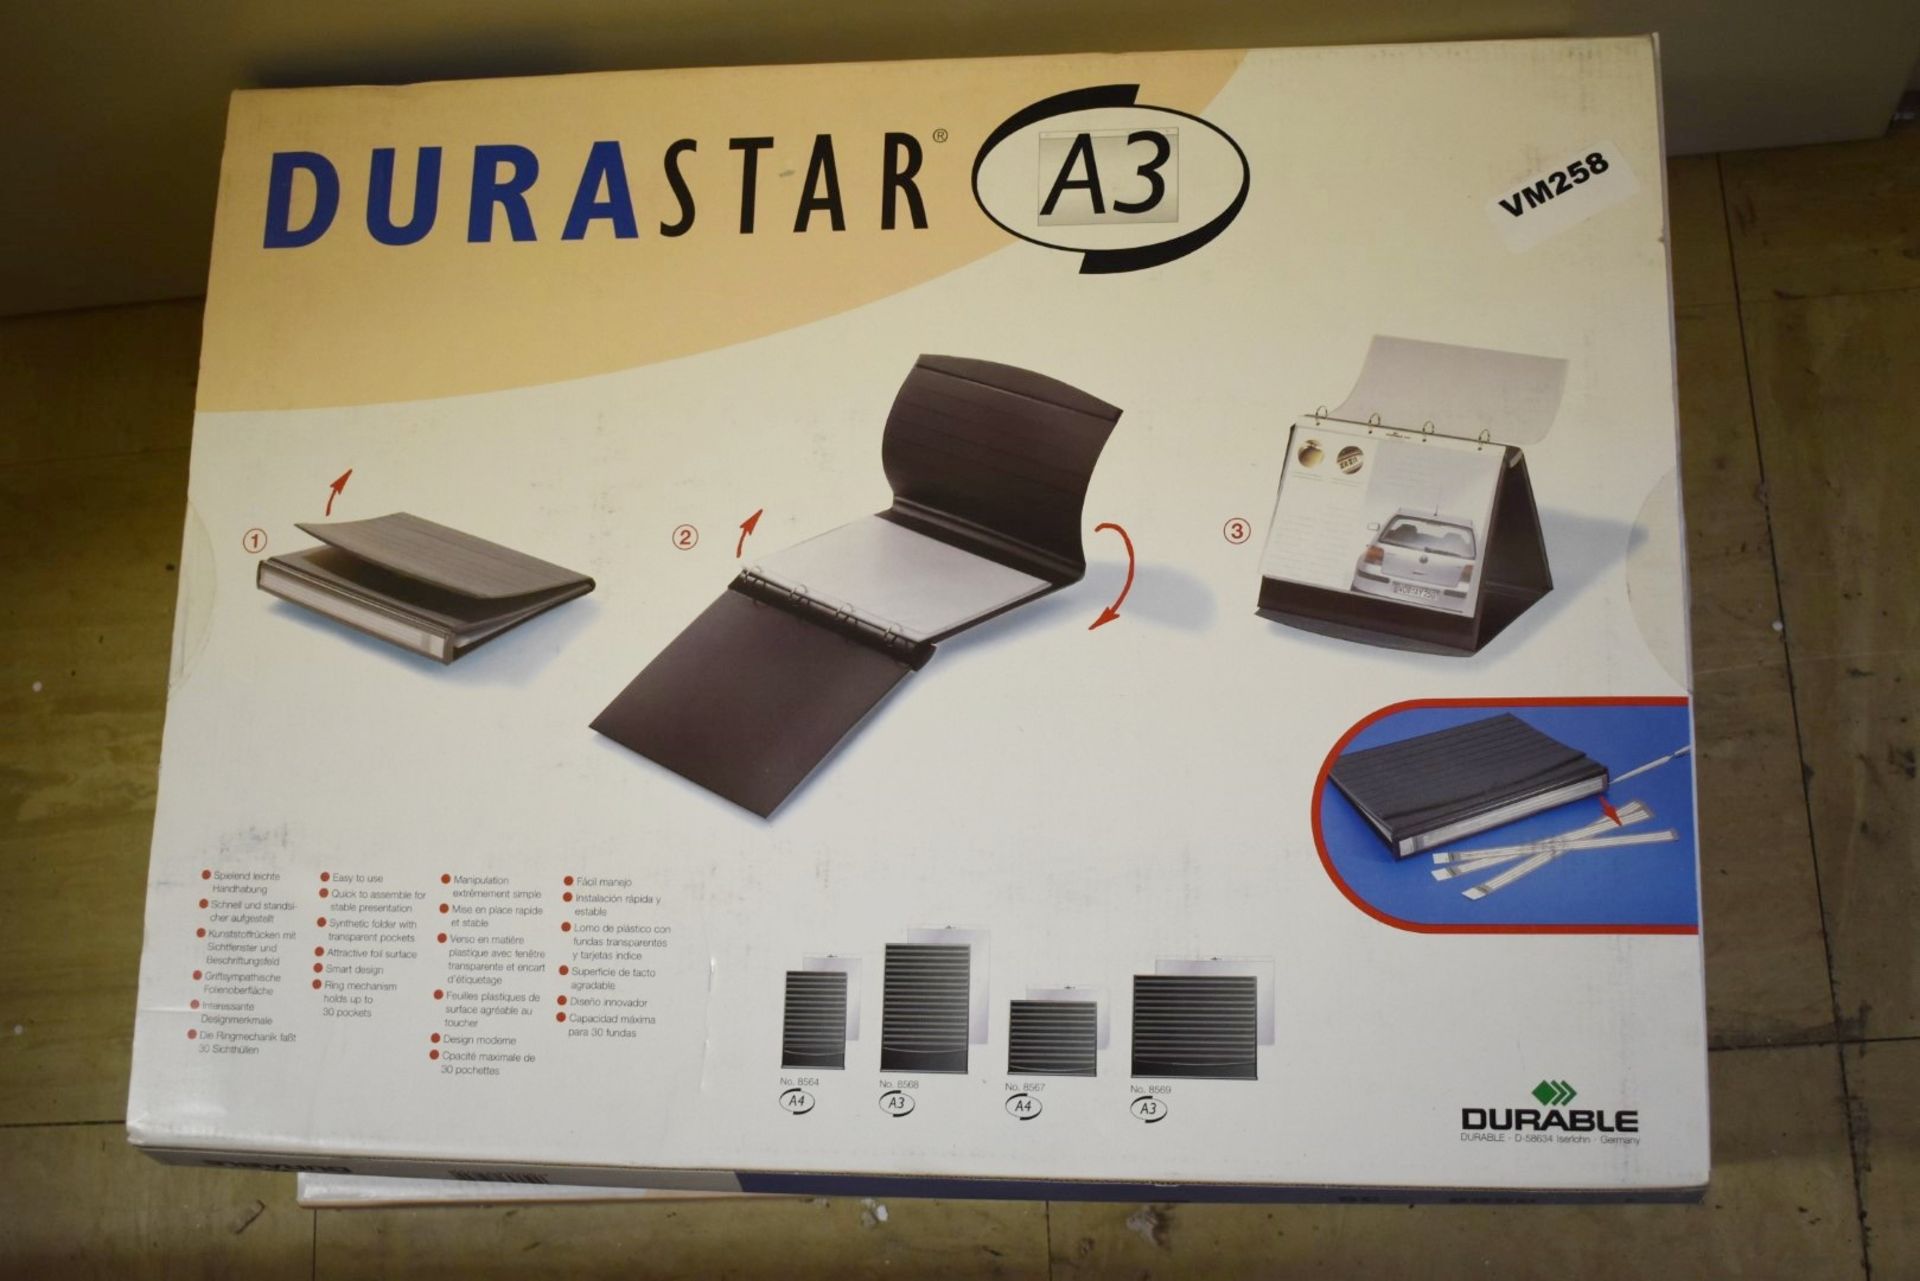 3 x Durable Durastar A3 Folders - New and Boxed - Ref VM258 IT - CL409 - Location: Wakefield WF16